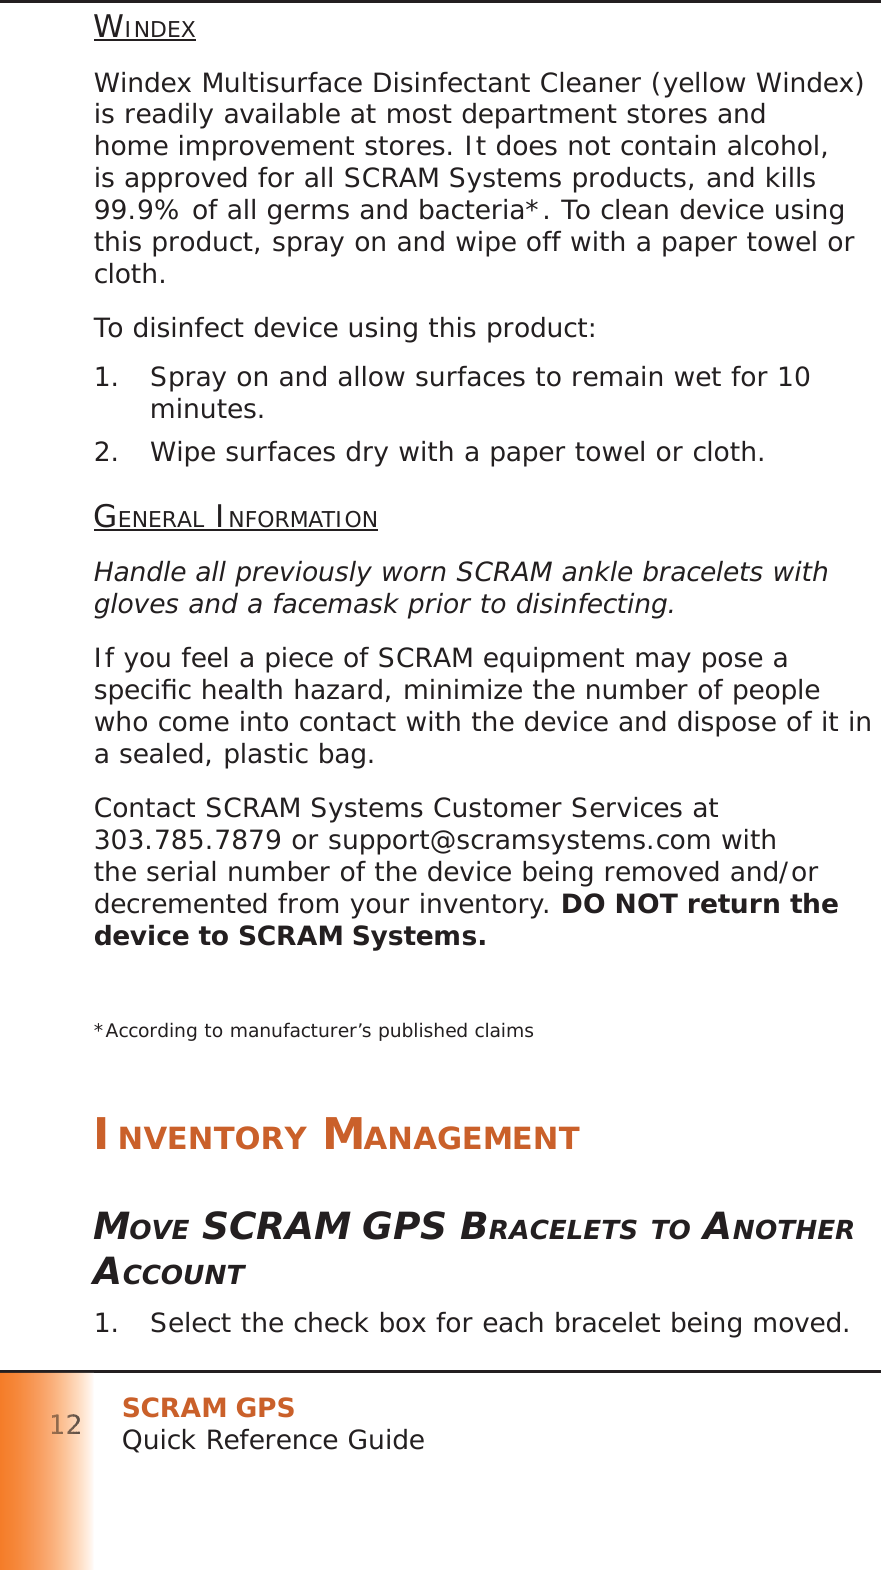 SCRAM GPSQuick Reference Guide121111112222222WINDEXWindex Multisurface Disinfectant Cleaner (yellow Windex) is readily available at most department stores and home improvement stores. It does not contain alcohol, is approved for all SCRAM Systems products, and kills 99.9% of all germs and bacteria*. To clean device using this product, spray on and wipe off with a paper towel or cloth.To disinfect device using this product:1.  Spray on and allow surfaces to remain wet for 10 minutes.2.  Wipe surfaces dry with a paper towel or cloth.GENERAL INFORMATIONHandle all previously worn SCRAM ankle bracelets with gloves and a facemask prior to disinfecting.If you feel a piece of SCRAM equipment may pose a speciﬁ c health hazard, minimize the number of people who come into contact with the device and dispose of it in a sealed, plastic bag.Contact SCRAM Systems Customer Services at 303.785.7879 or support@scramsystems.com with the serial number of the device being removed and/or decremented from your inventory. DO NOT return the device to SCRAM Systems.*According to manufacturer’s published claimsINVENTORY MANAGEMENTMOVE SCRAM GPS BRACELETS TO ANOTHER ACCOUNT1.  Select the check box for each bracelet being moved.